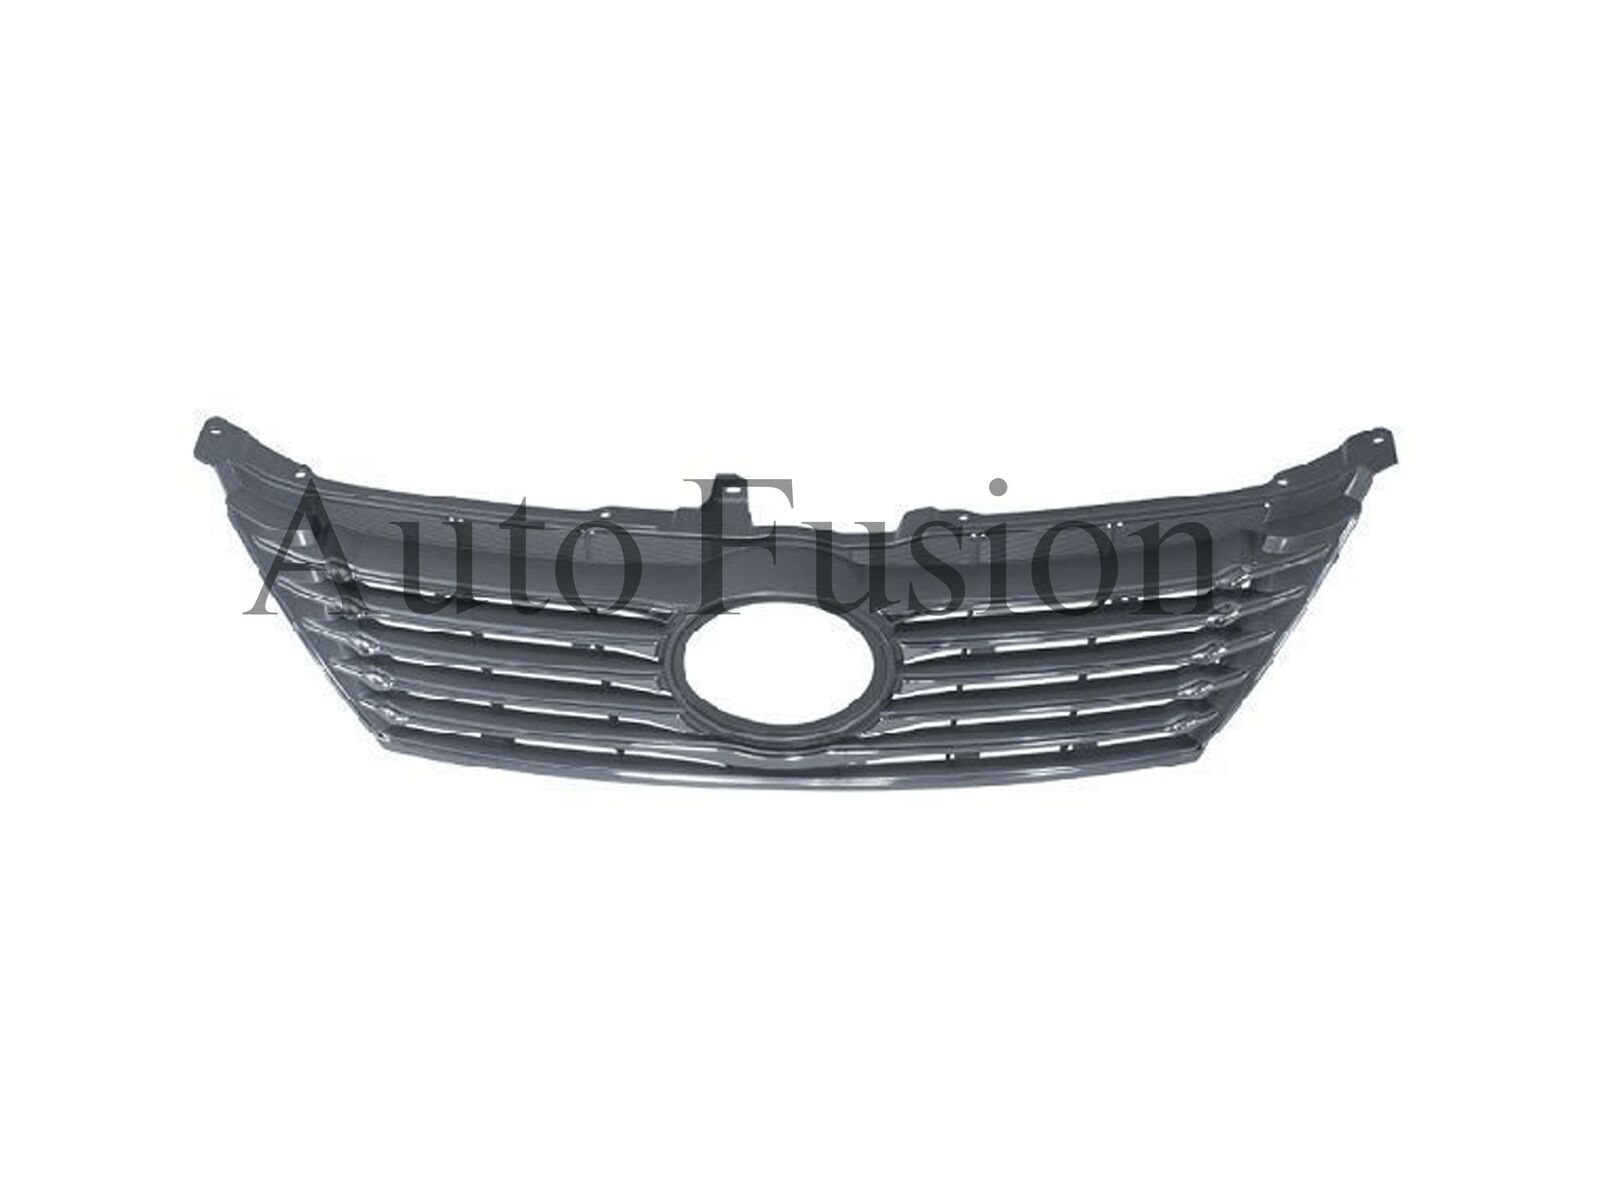 Grille Front Grey/Chrome For Toyota Aurion Gsv50 2012-2015